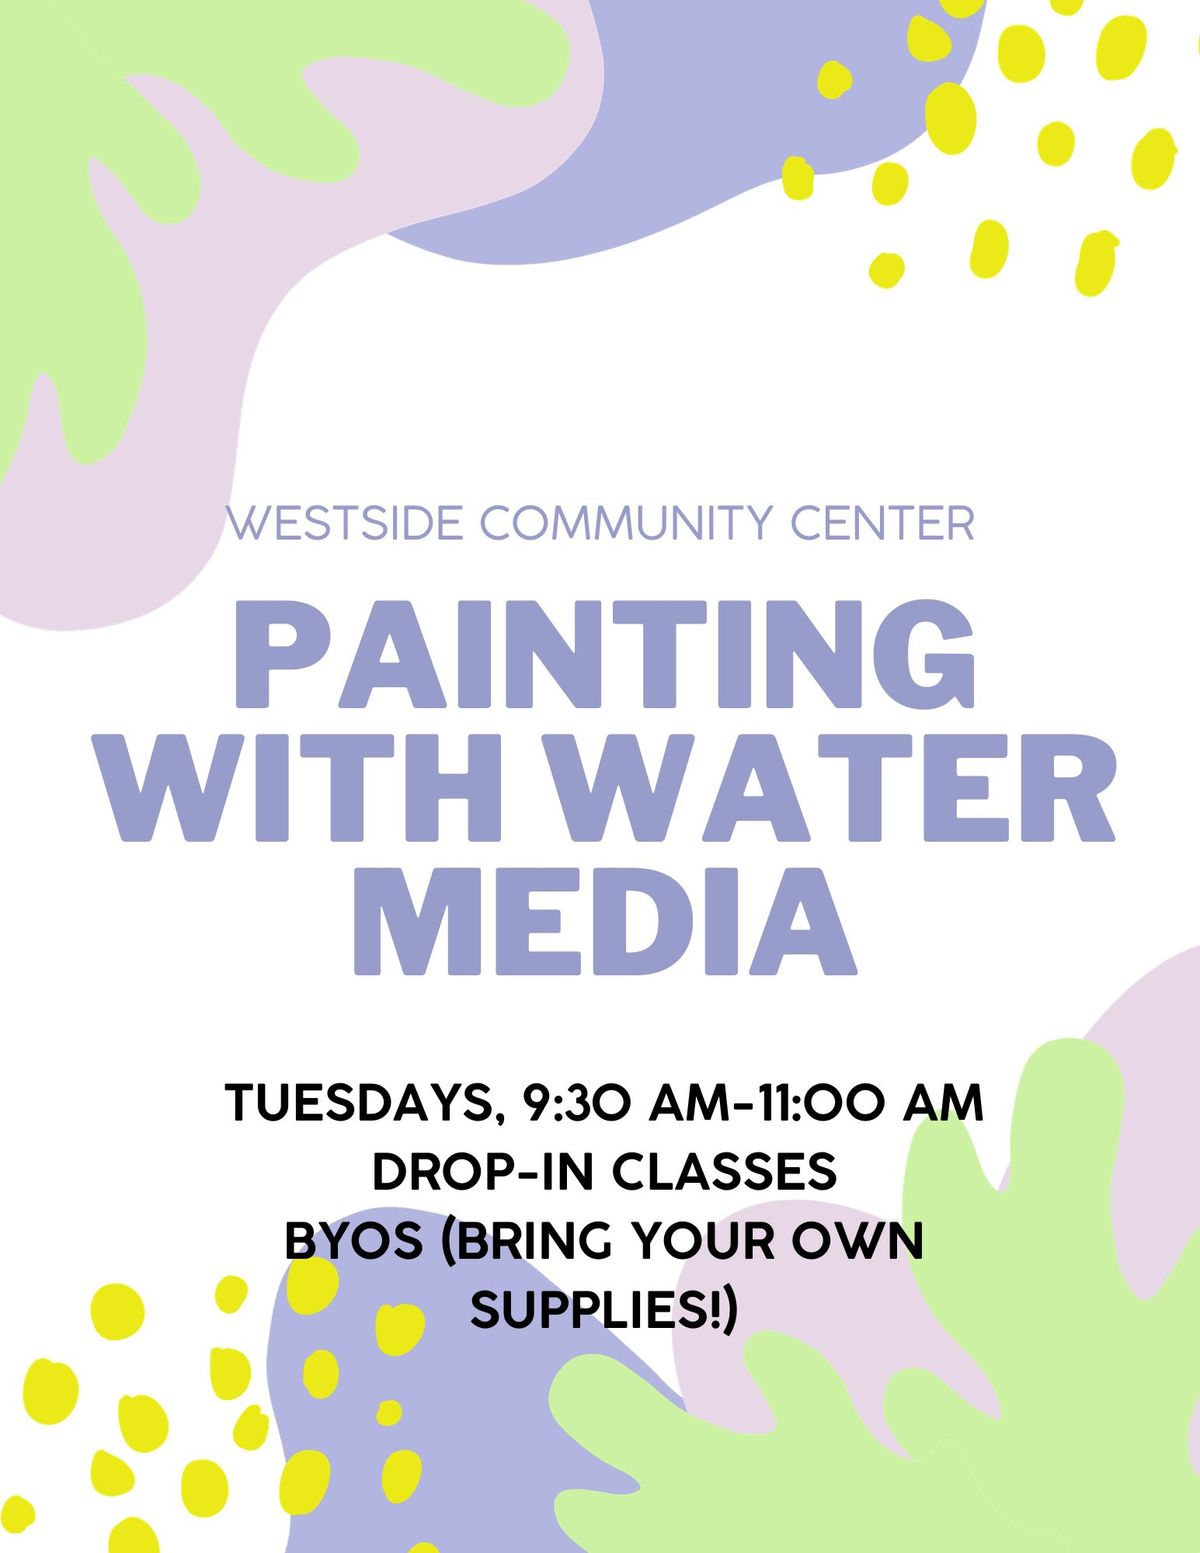 Painting with Water Media - FREE